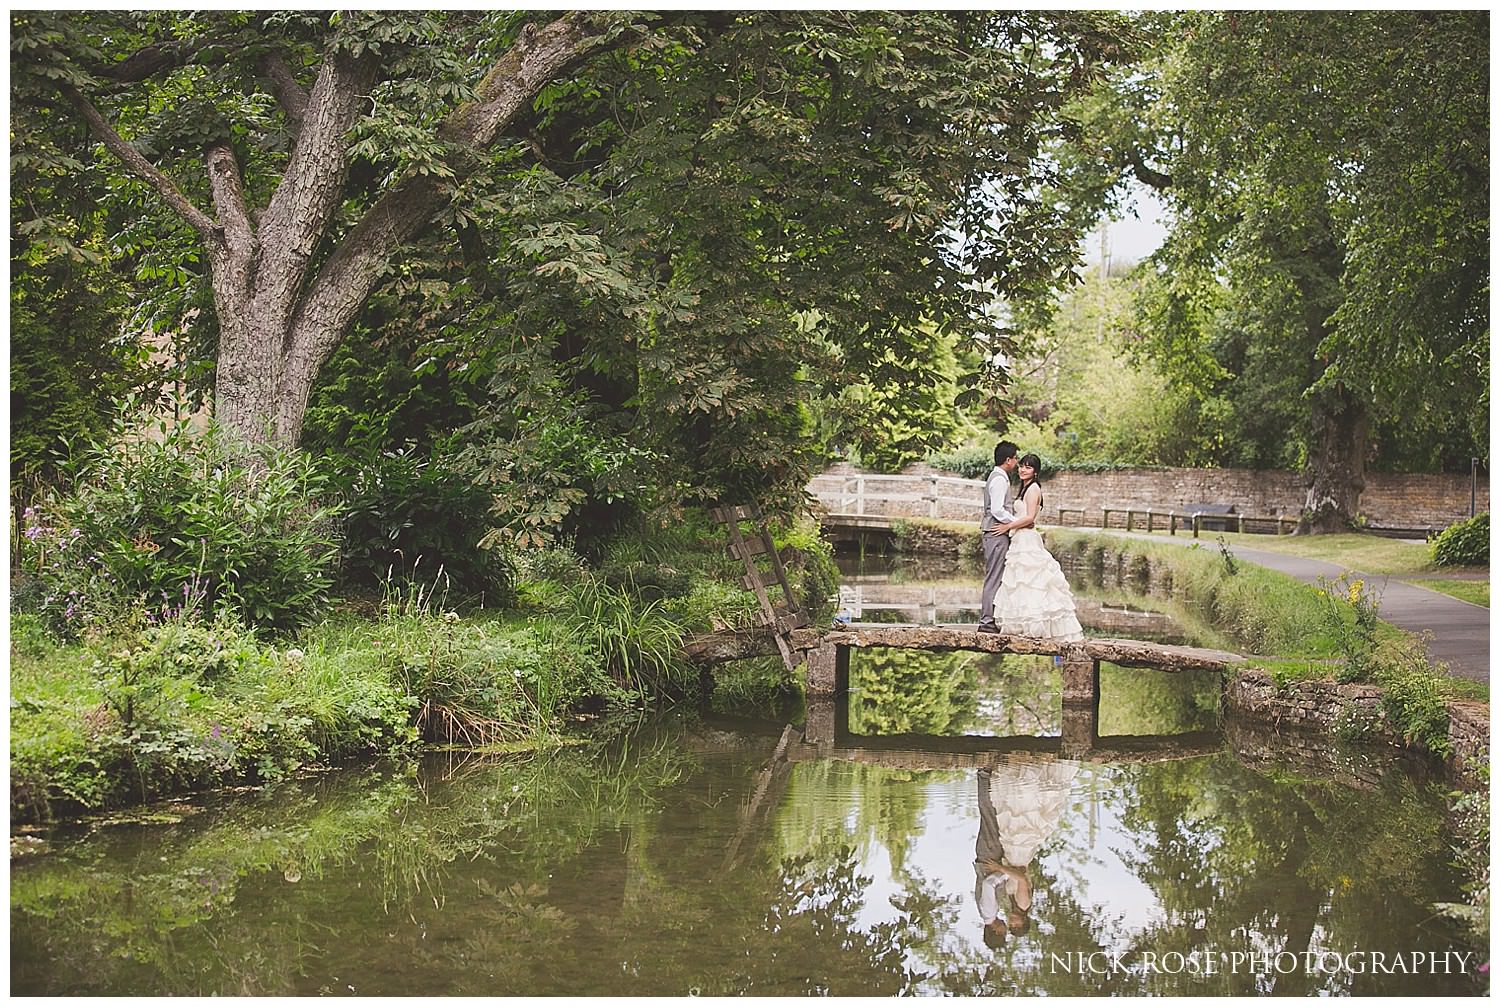  Reflection in a stream of a bride and groom in a wedding dress and suit during a pre wedding photography session in Lower Slaughter 